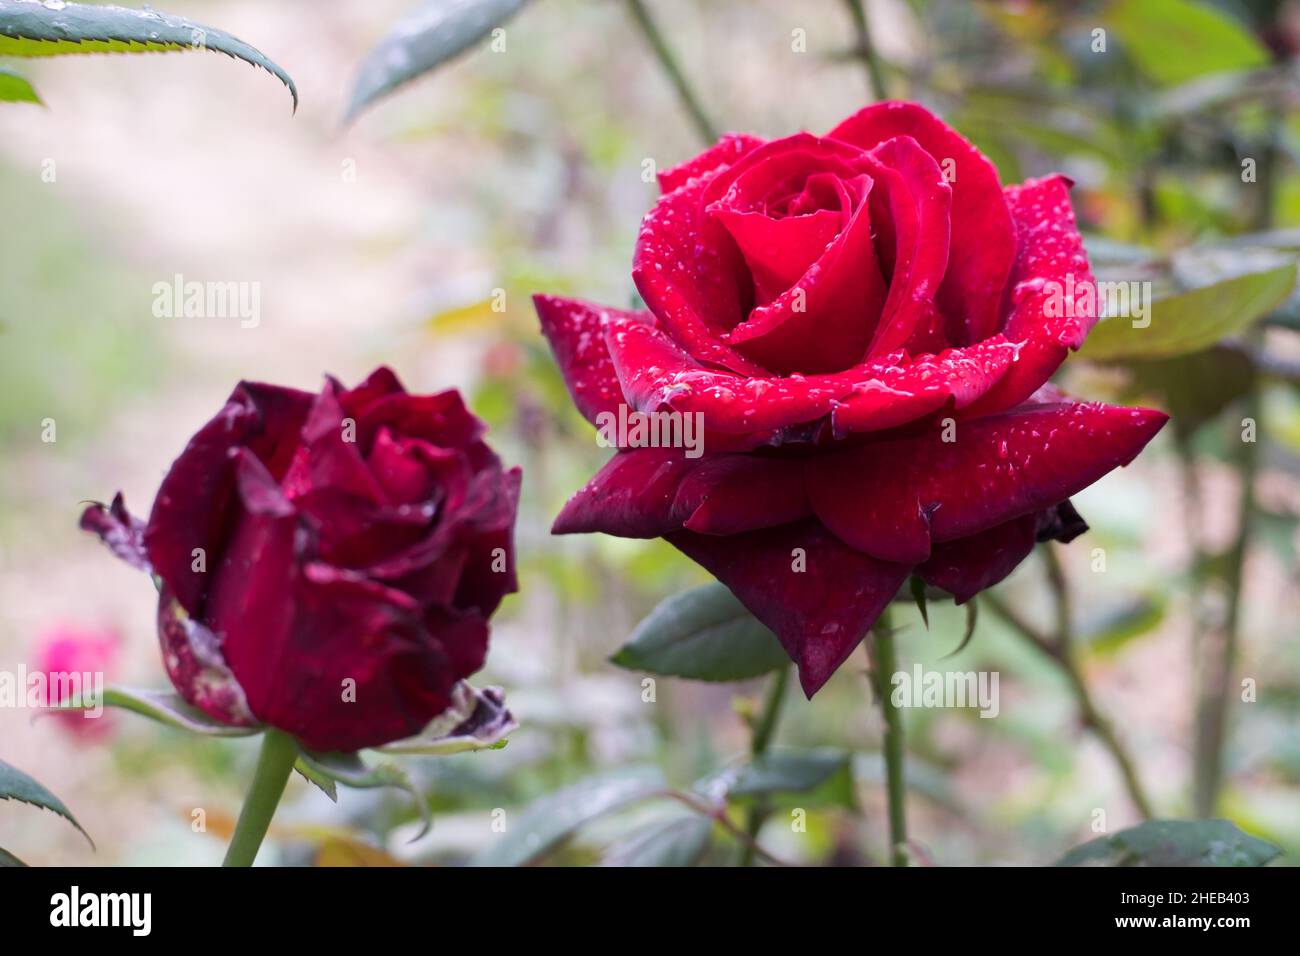 A close-up of a beautiful red rose with another peta nearl out of focus Stock Photo